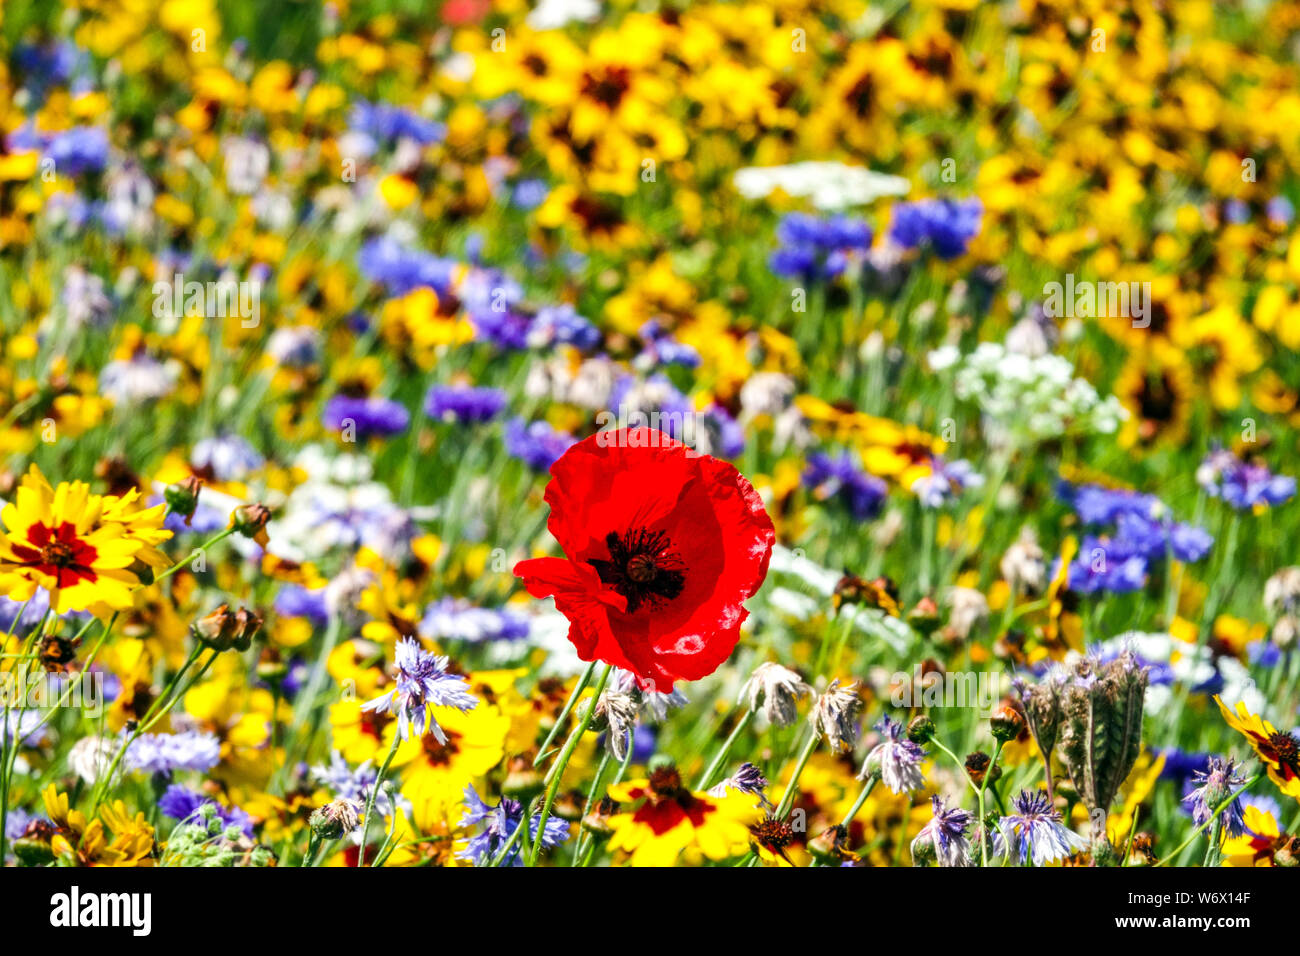 Annual plants for direct seeding into red yellow blue beds meadows, strips of mixtures of colorful summer flowers, Plains Coreopsis tinctoria poppy Stock Photo